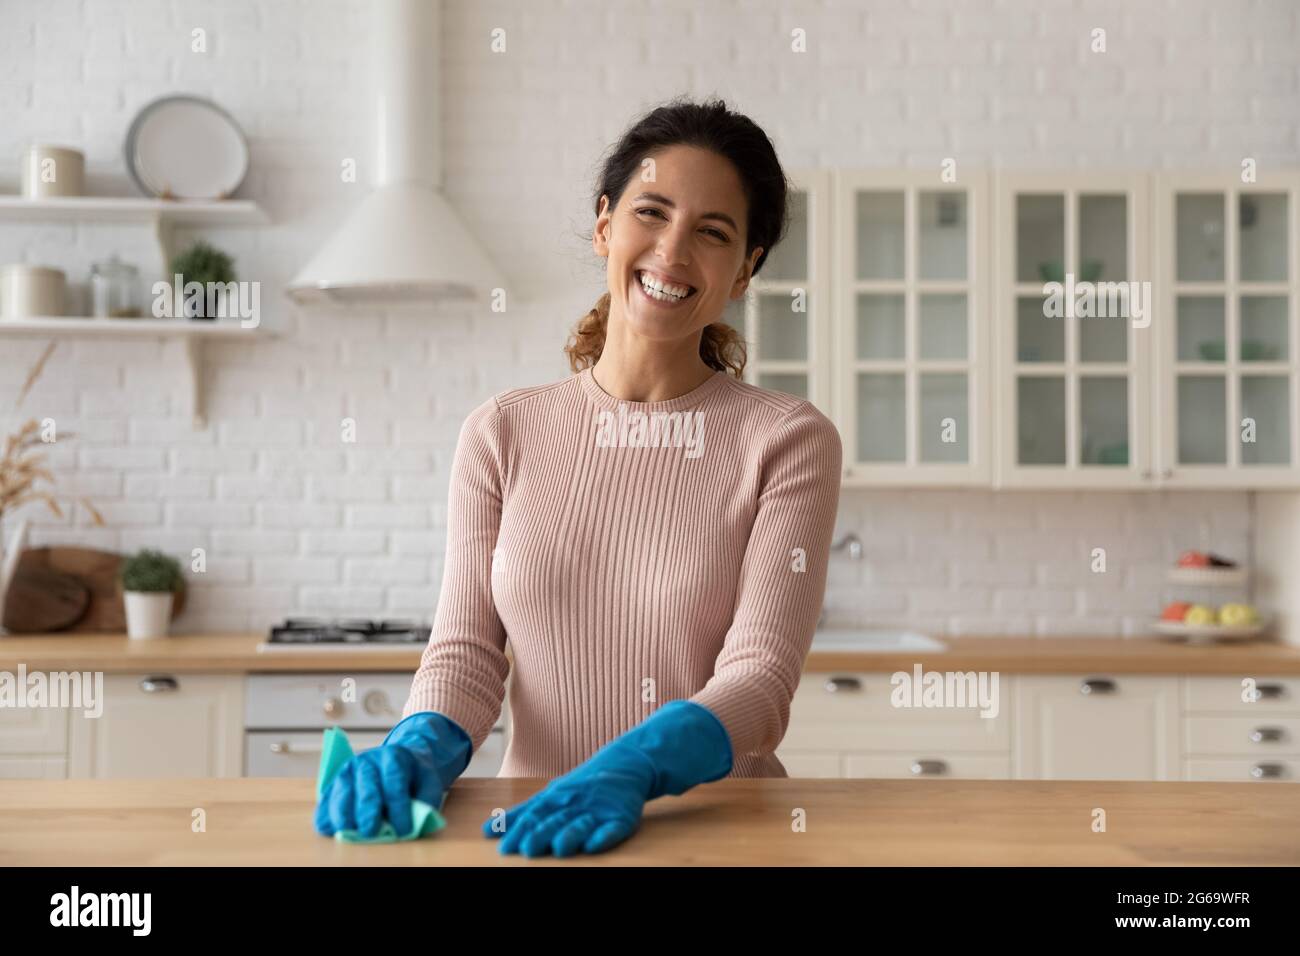 Portrait of smiling hispanic housewife cleaning kitchen. Stock Photo